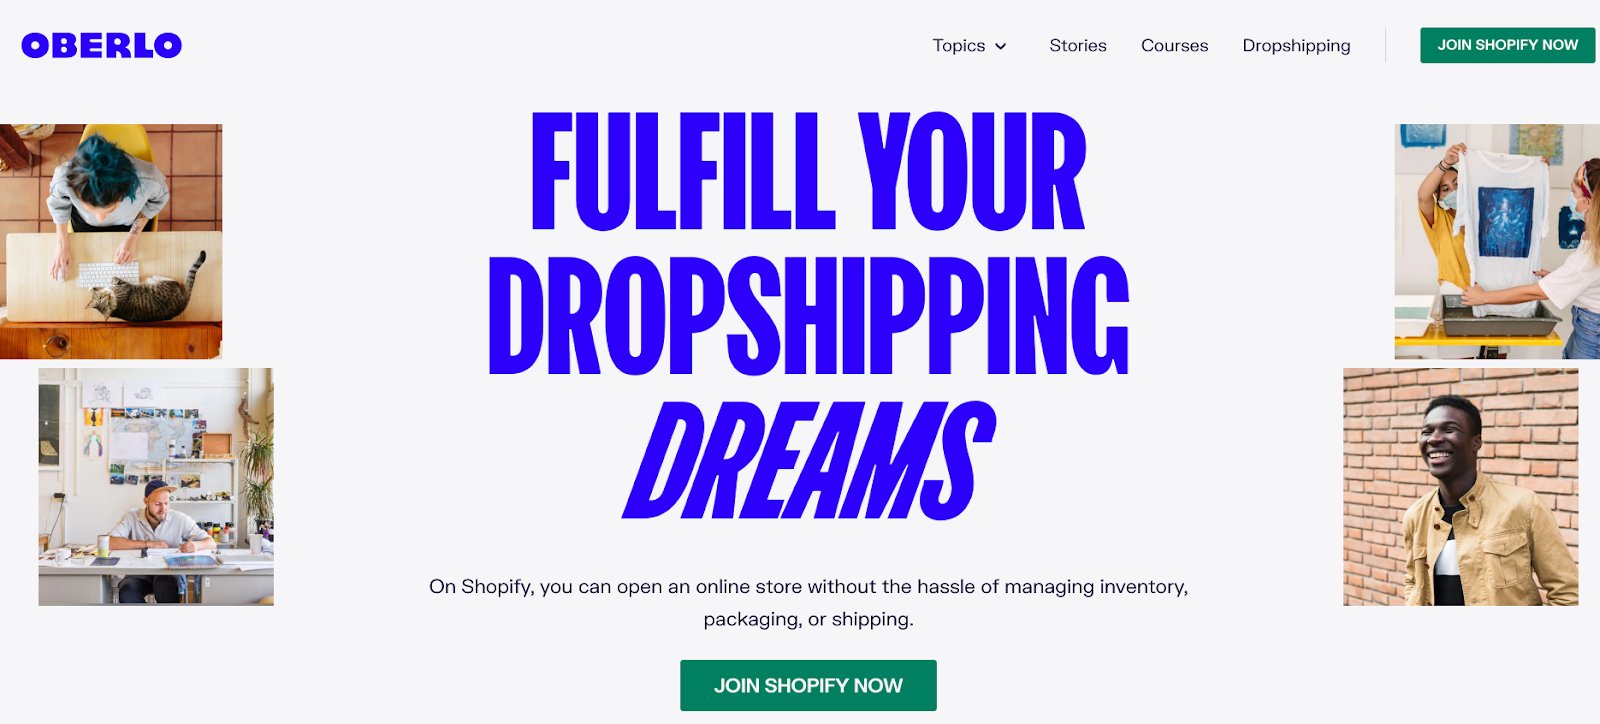 AliExpress Dropshipping with oberlo